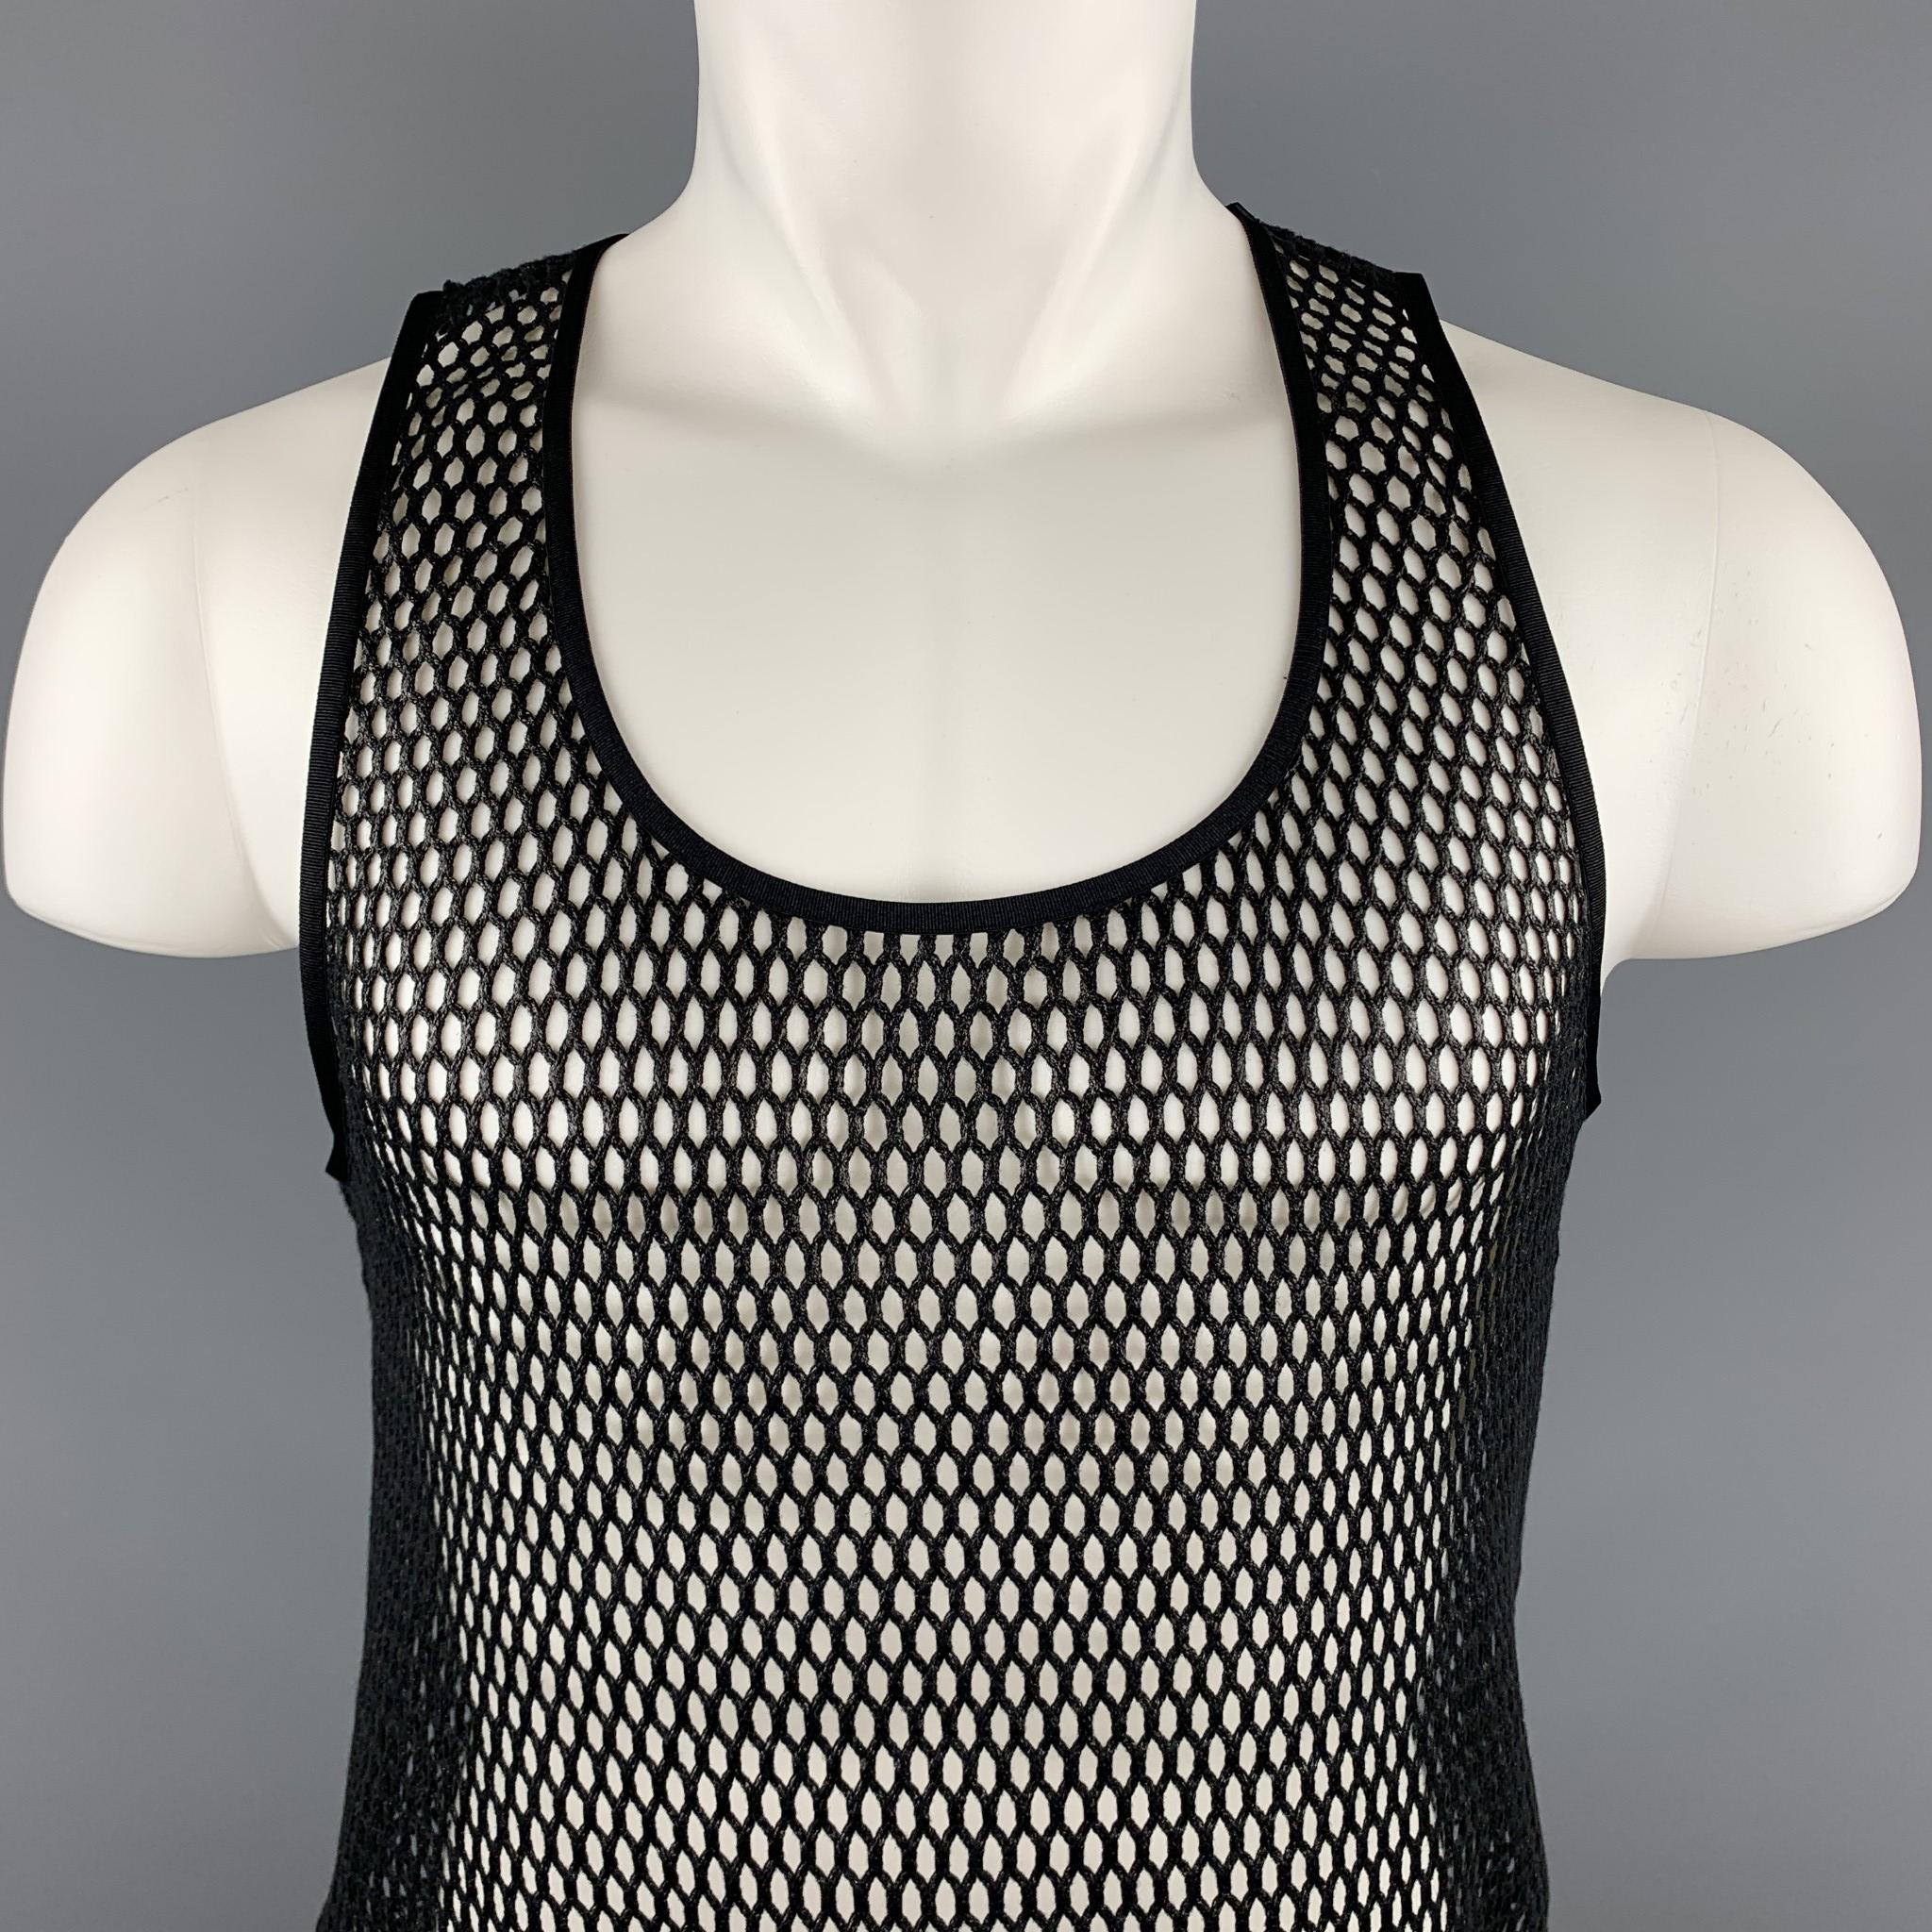 SAINT LAURENT tank top comes in a black mesh. No tags attached.

Excellent Pre-Owned Condition.
Marked: No size marked

Measurements:

Shoulder: 12 in.
Chest: 32 in.
Length: 21.5 in.